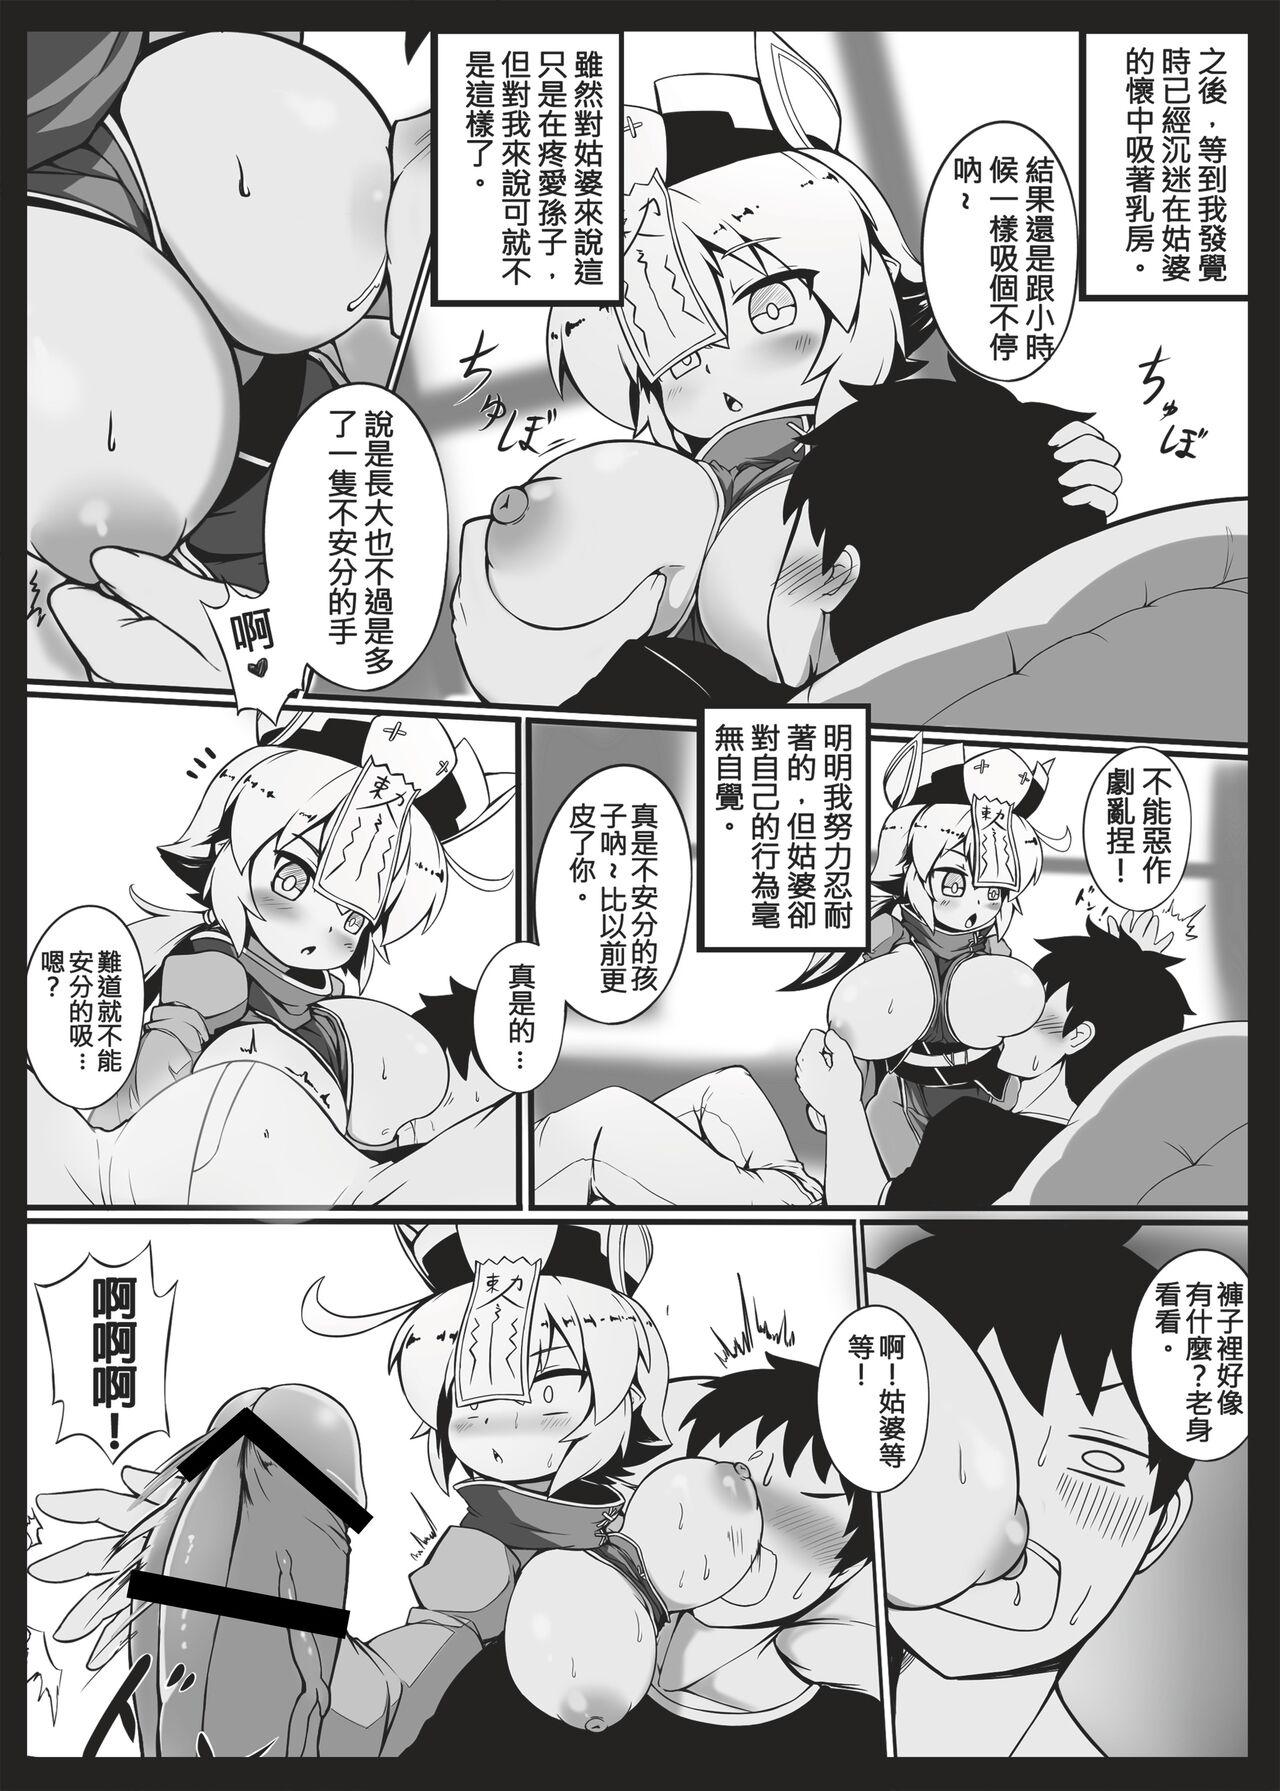 Blowing Make baby with my oppai loli old aunt 1 - Original Teasing - Page 6